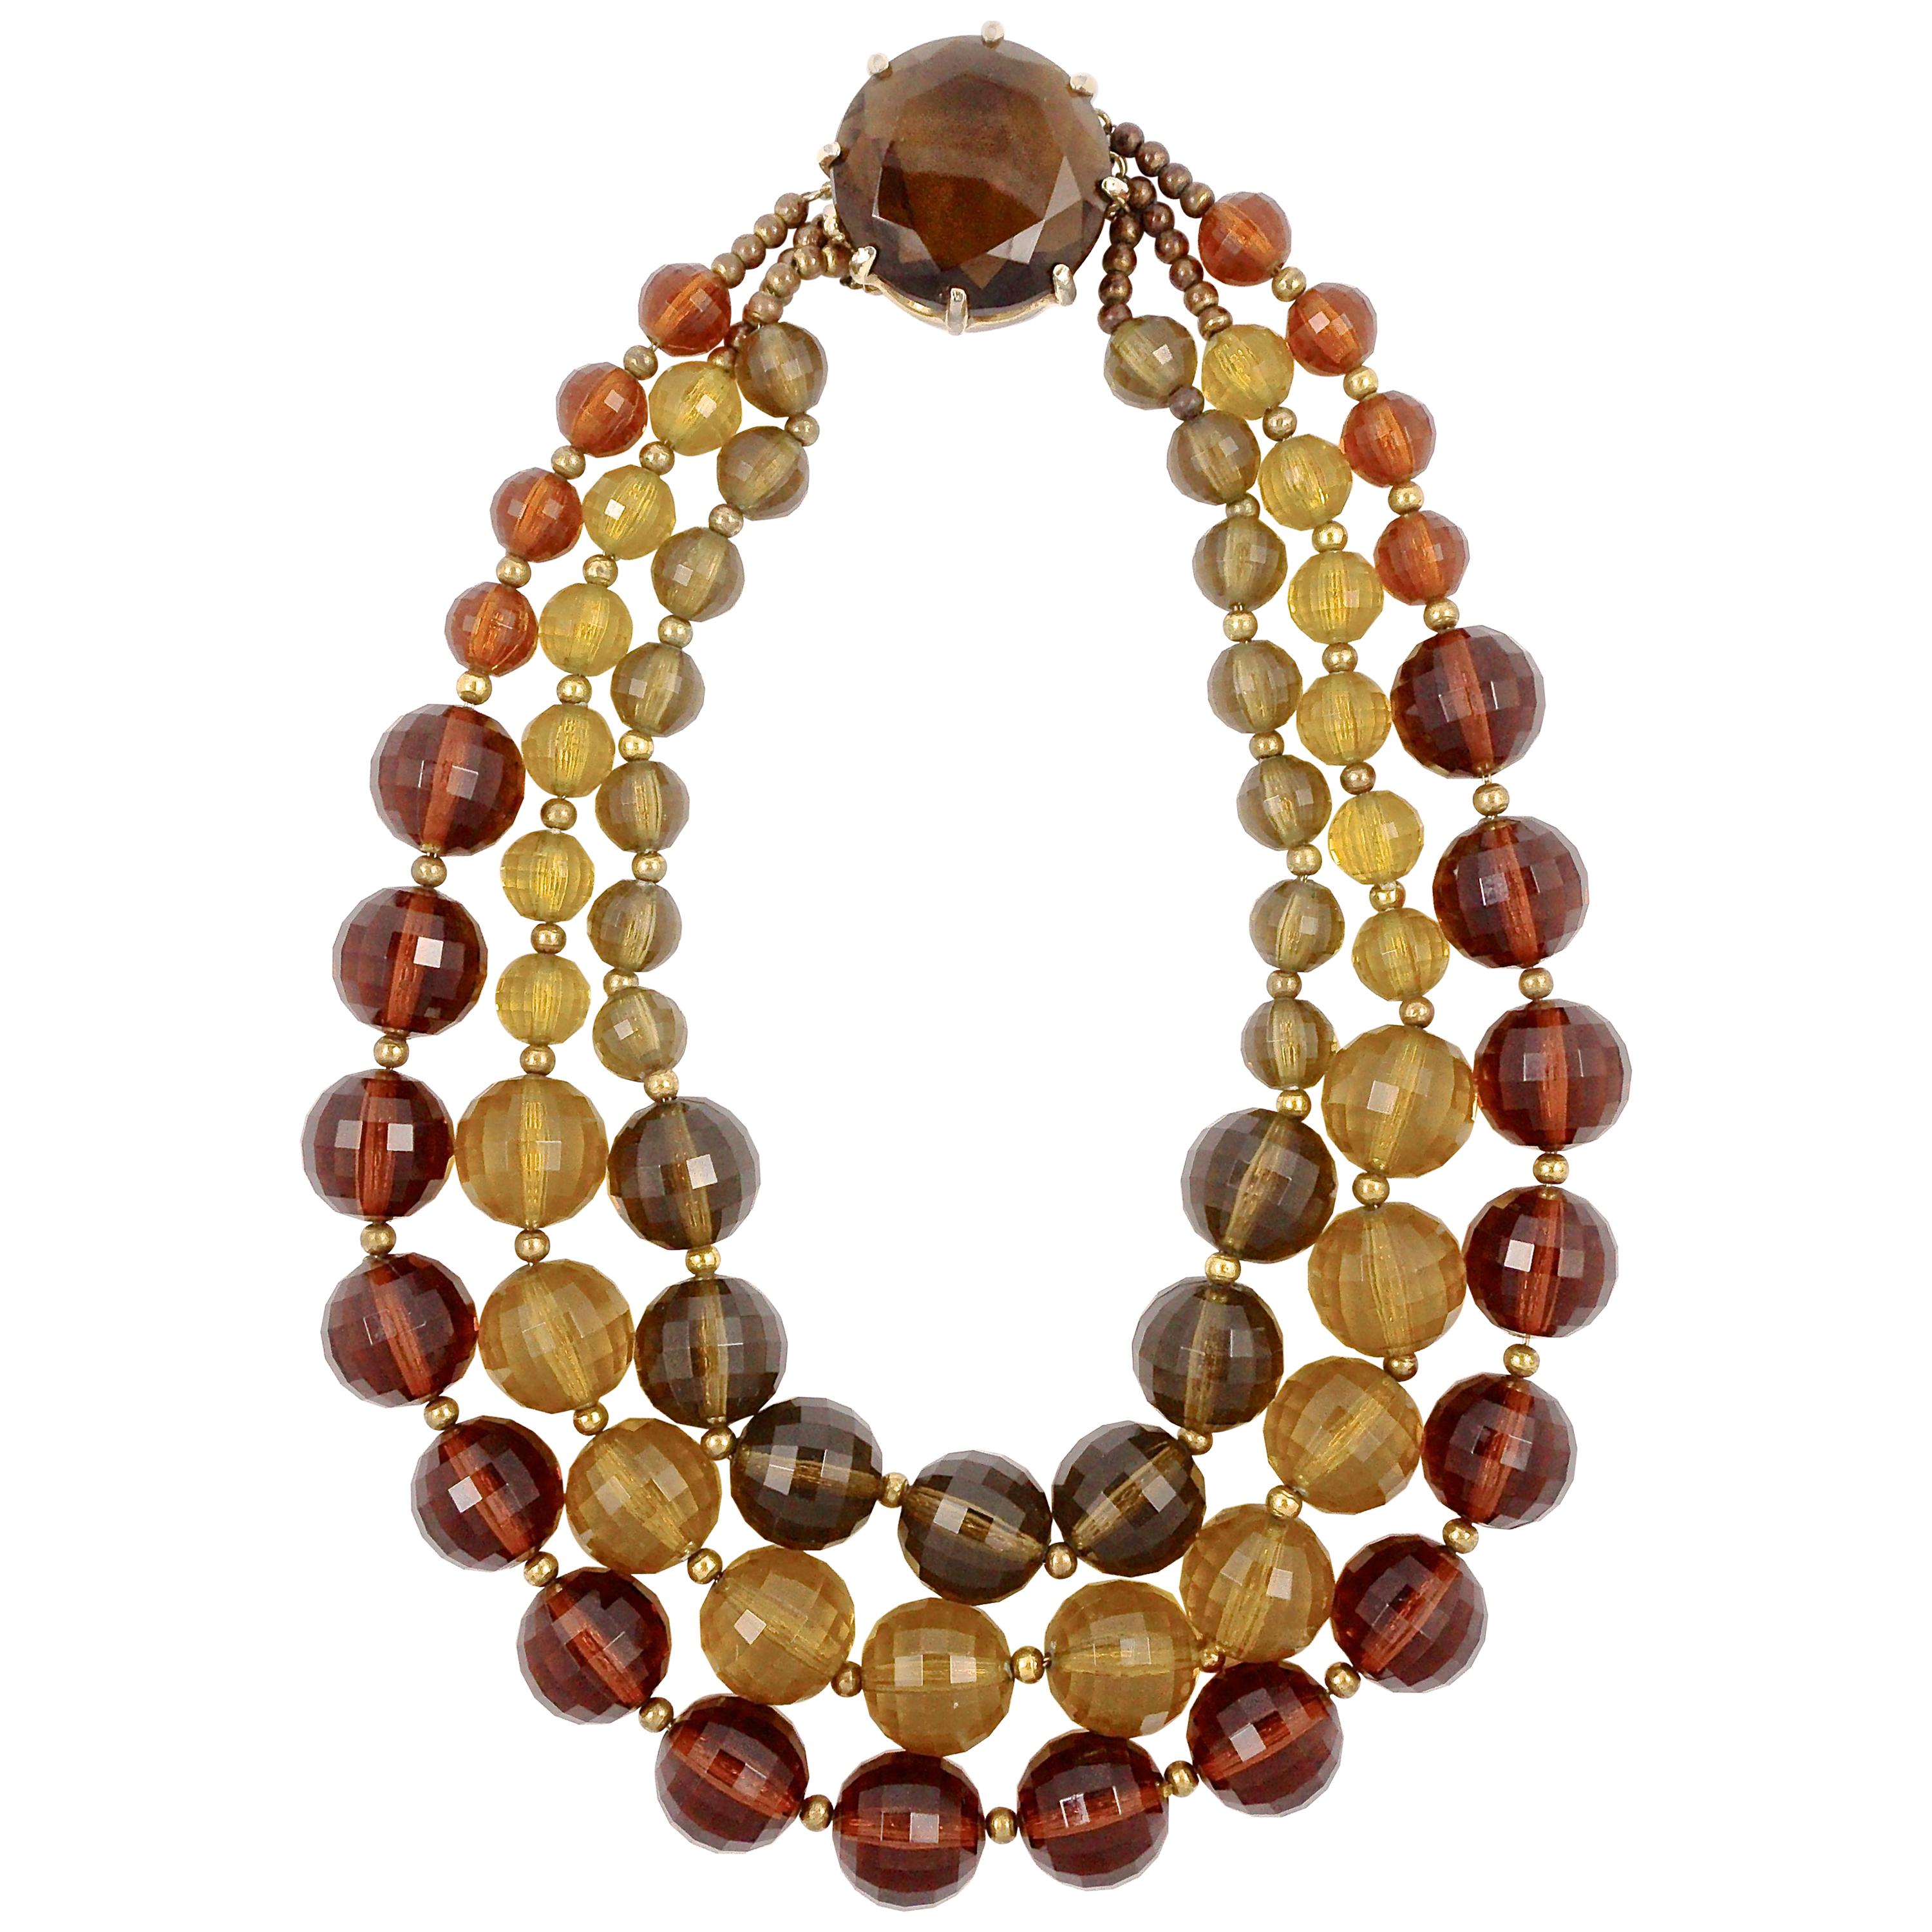 Gold Plated Triple Strand Multi Colored Plastic Bead Necklace with a Glass Clasp